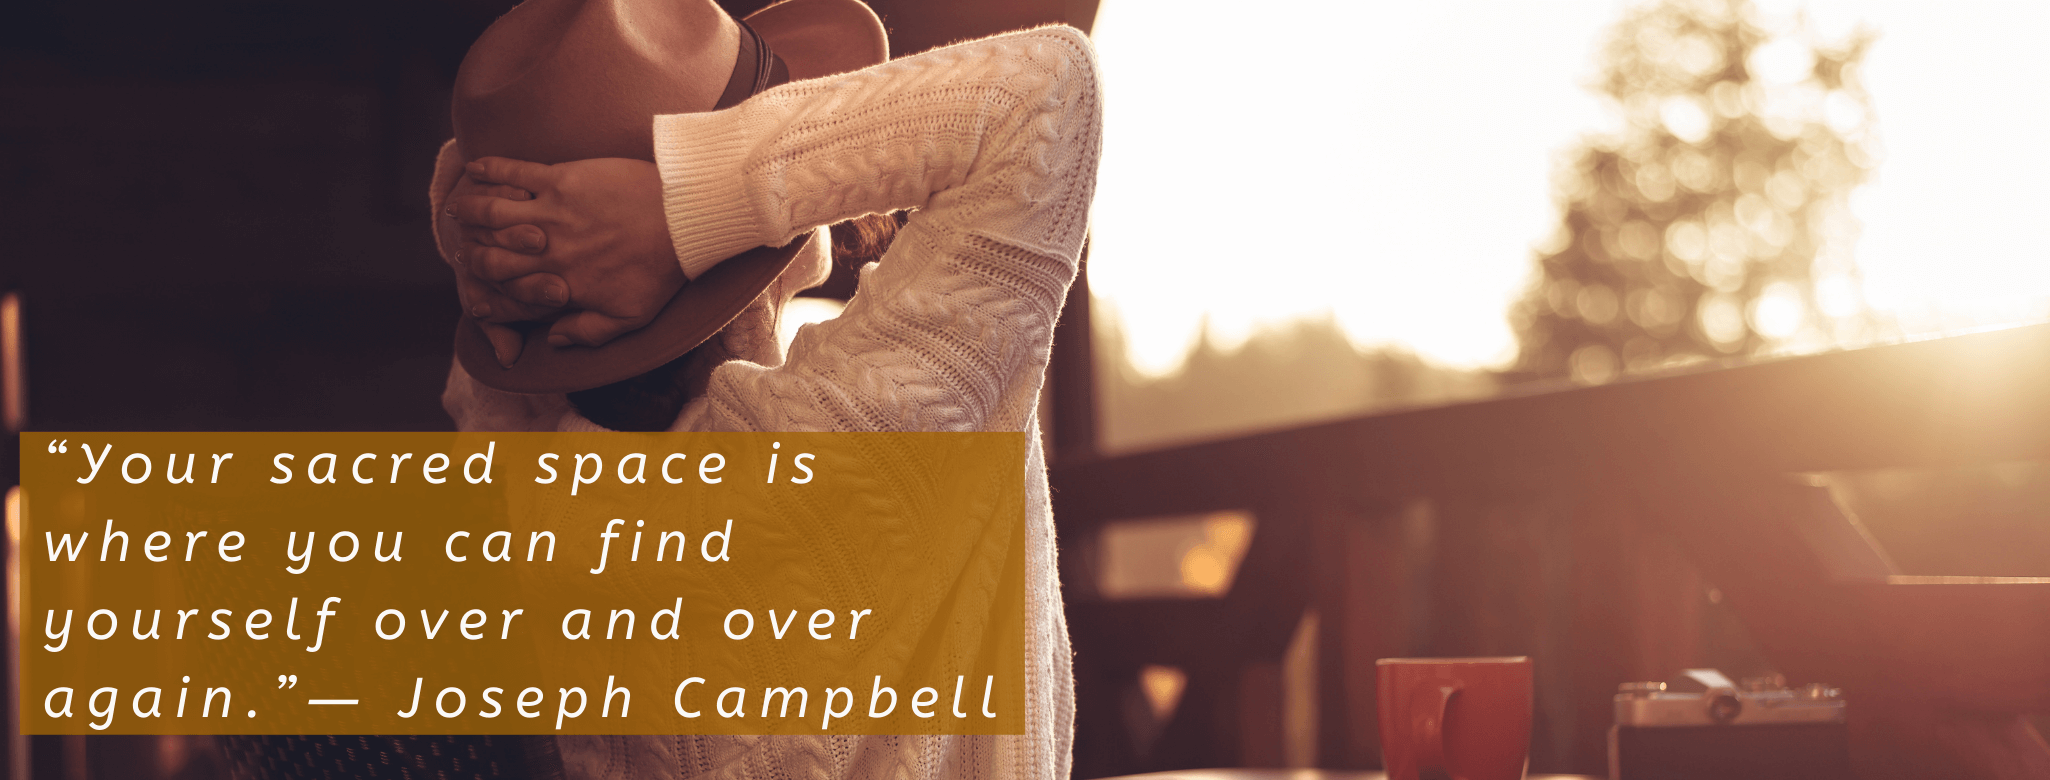 “Your sacred space is where you can find yourself over and over again.”― Joseph Campbell (3)